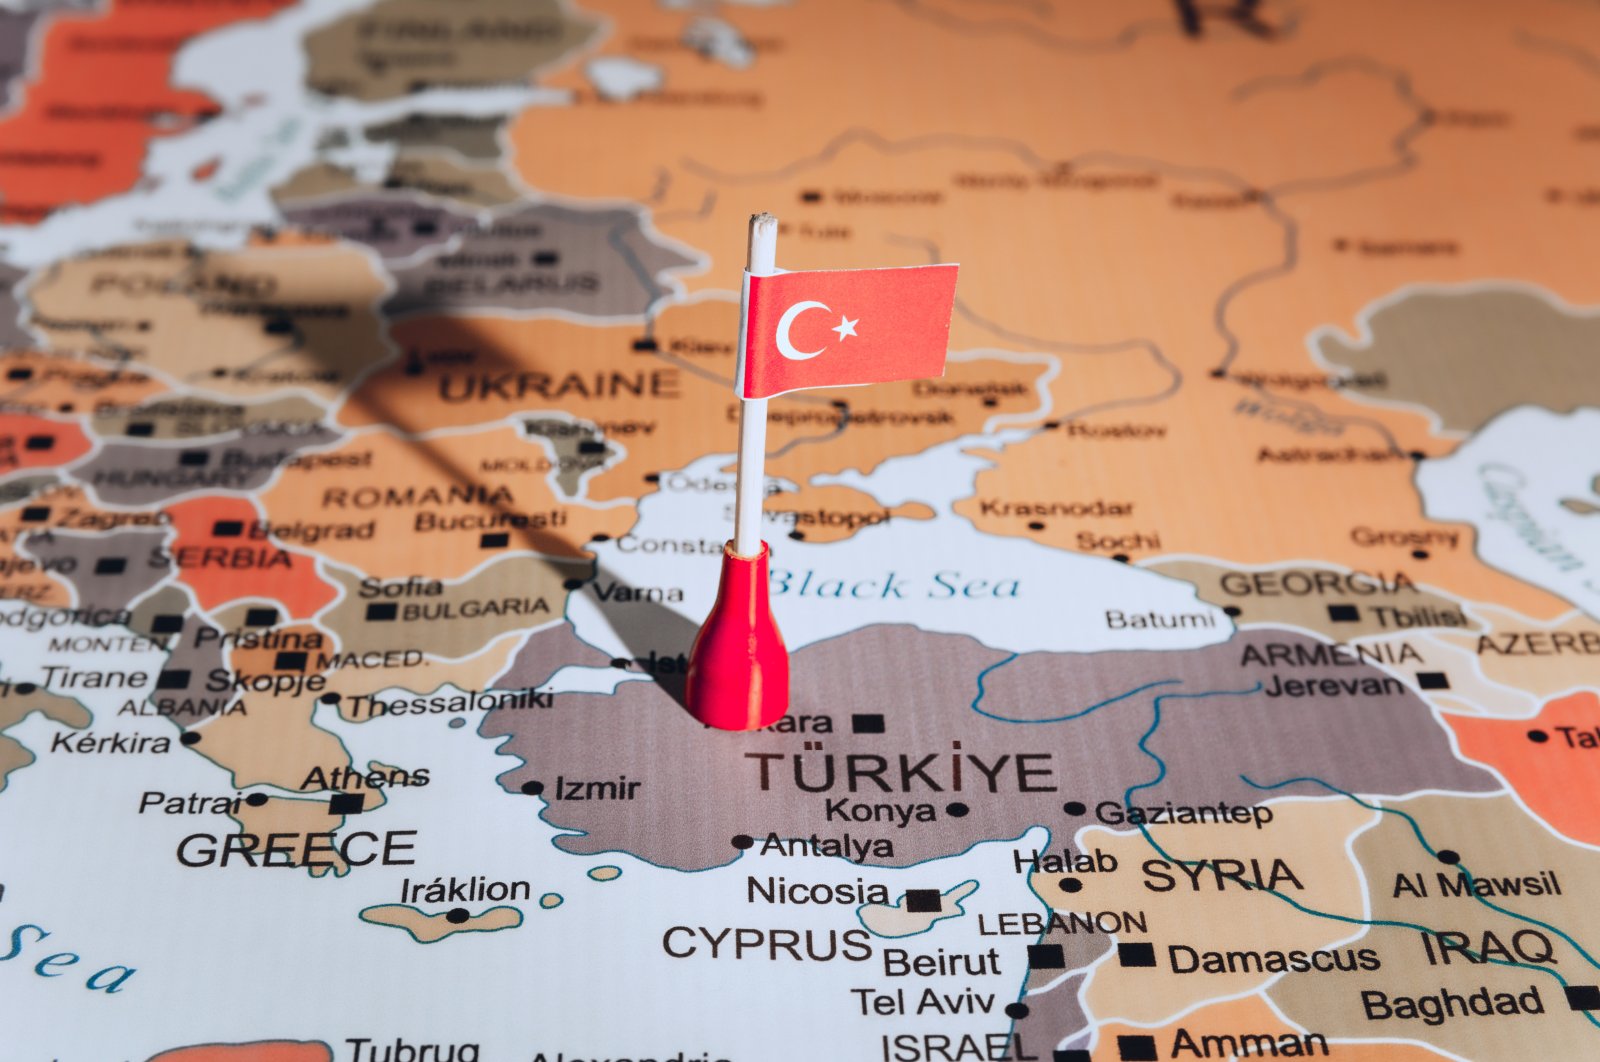 &quot;Türkiye’s direct involvement in peace diplomacy, counterterrorism, the South Caucasus region’s stability and energy/logistics corridors does not just relate to its geographical location.&quot; (Shutterstock Illustration)